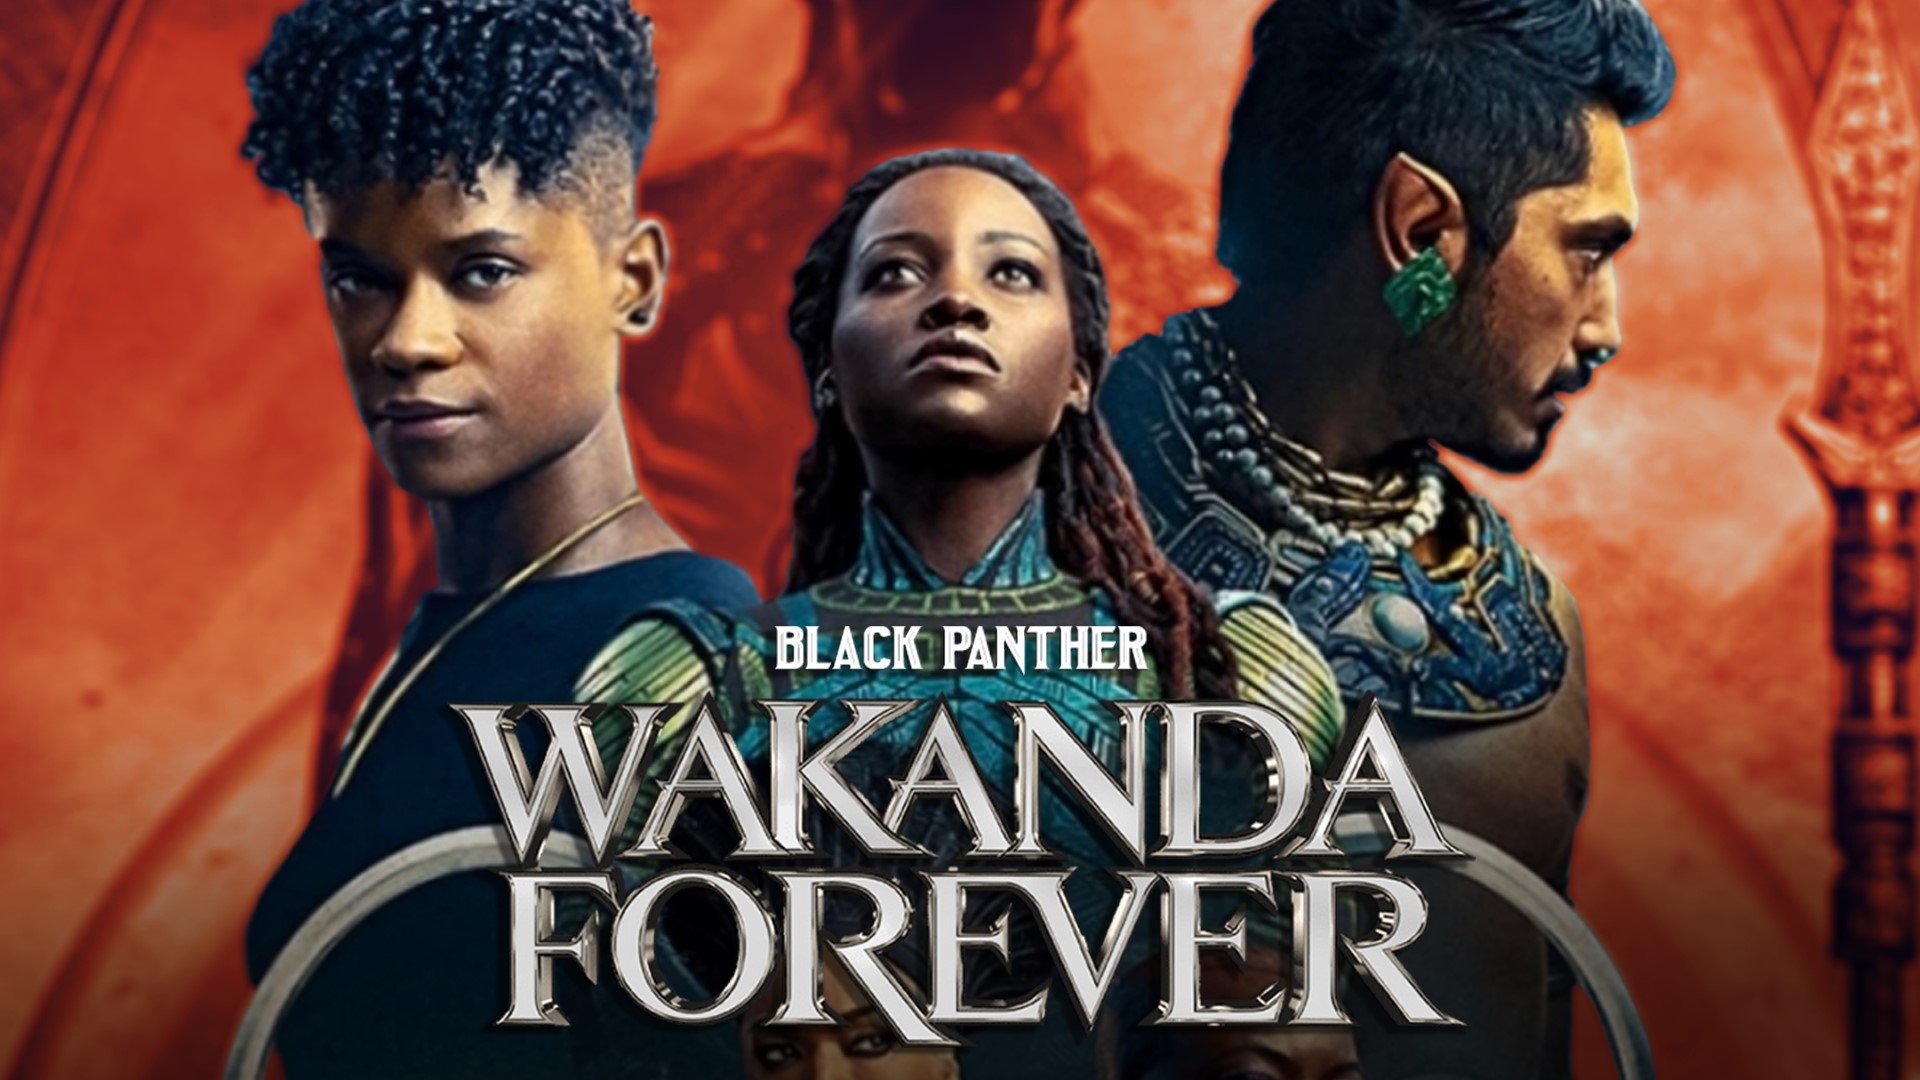 Wakanda Forever' tops box office for 5th straight week 